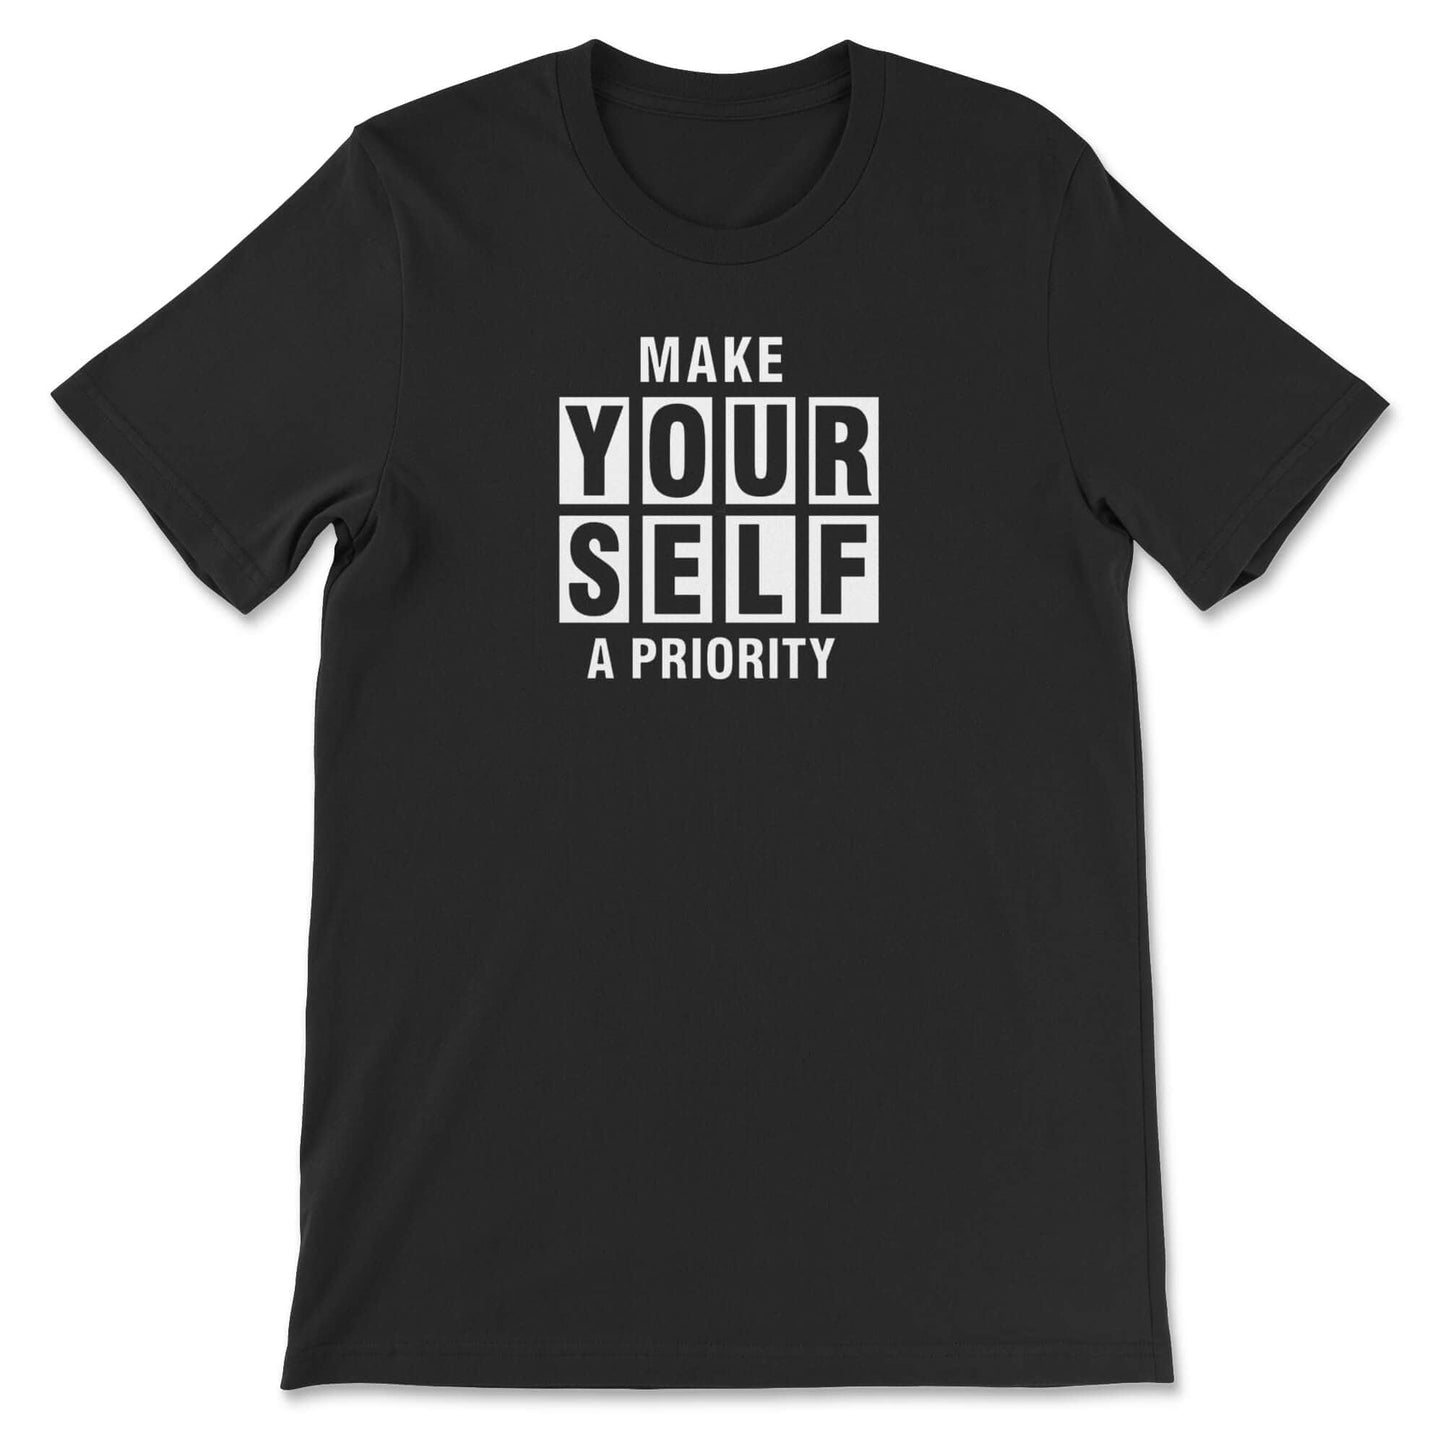 Make Yourself A Priority Graphics T-Shirt Black Bhooki